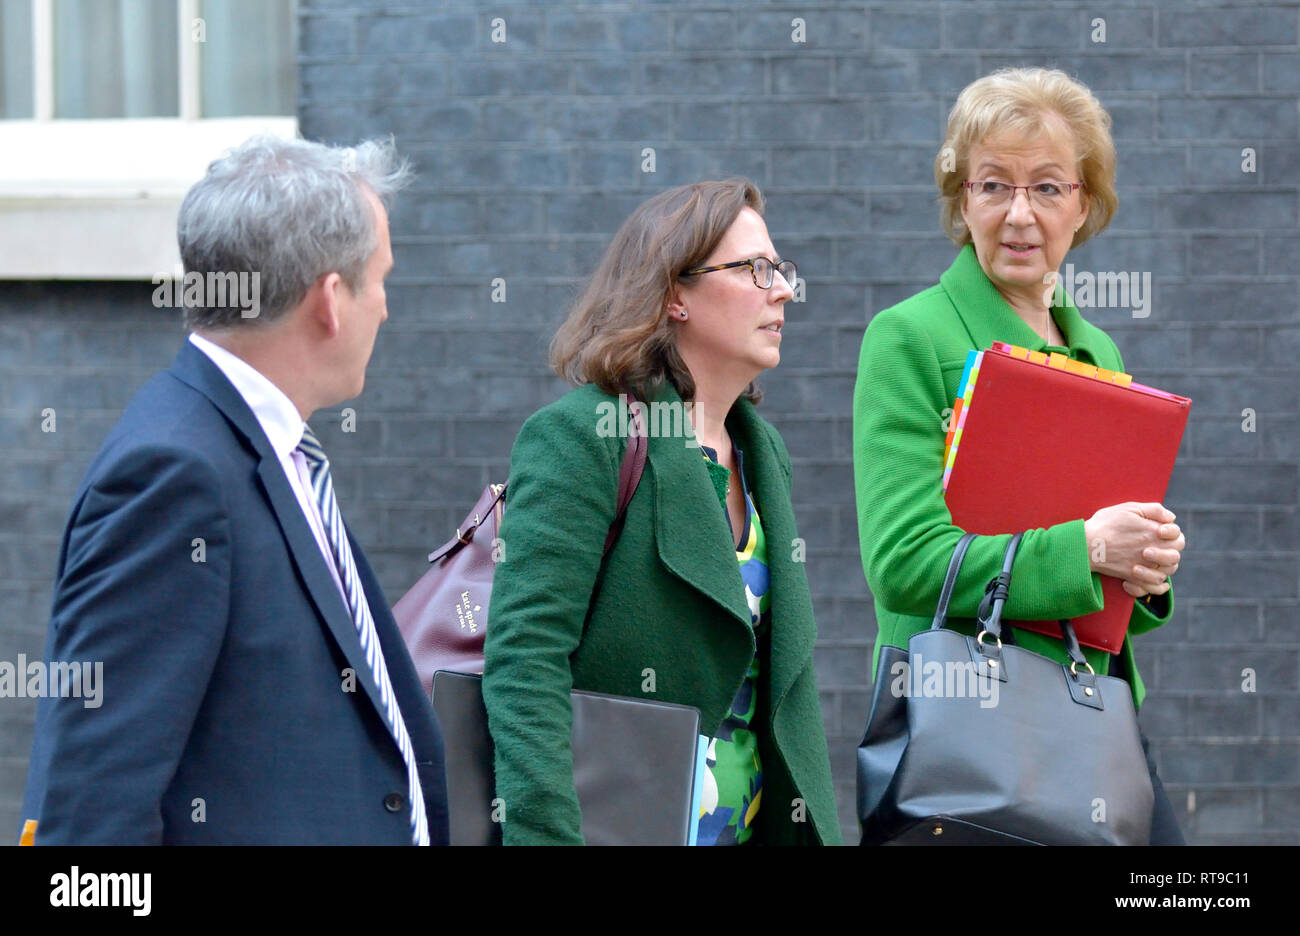 Andrea Leadsom MP (Leader of the House of Commons) leaving Downing Street with Natalie Evans / Baroness Evans of Bowes Park (Leader of the House of Lo Stock Photo